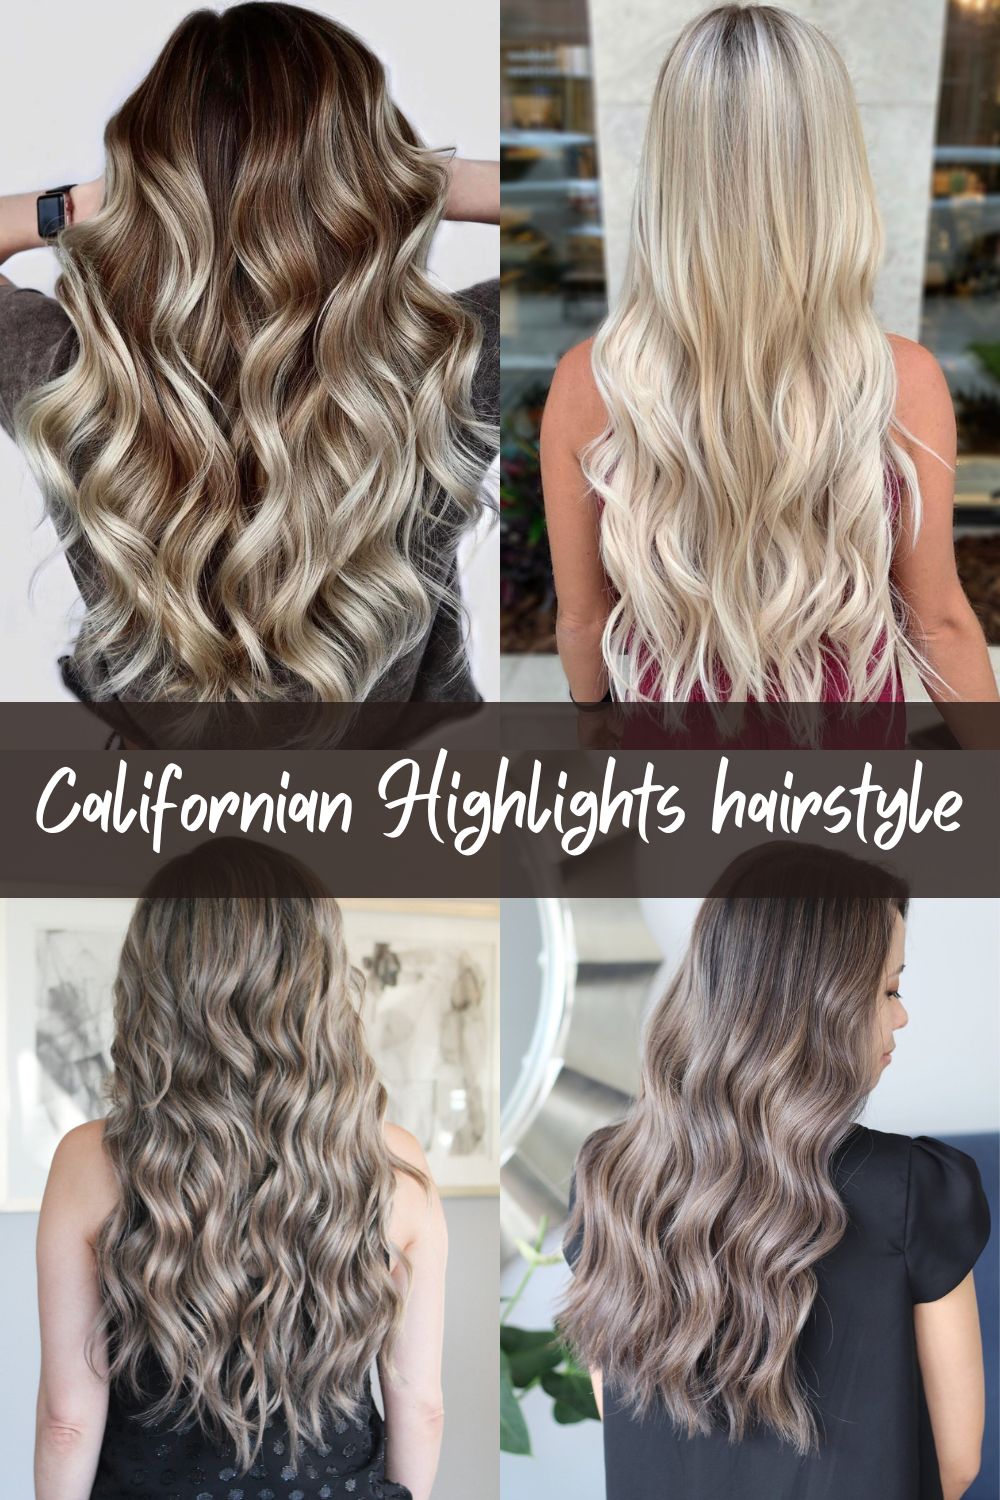 Californian Highlights hairstyle